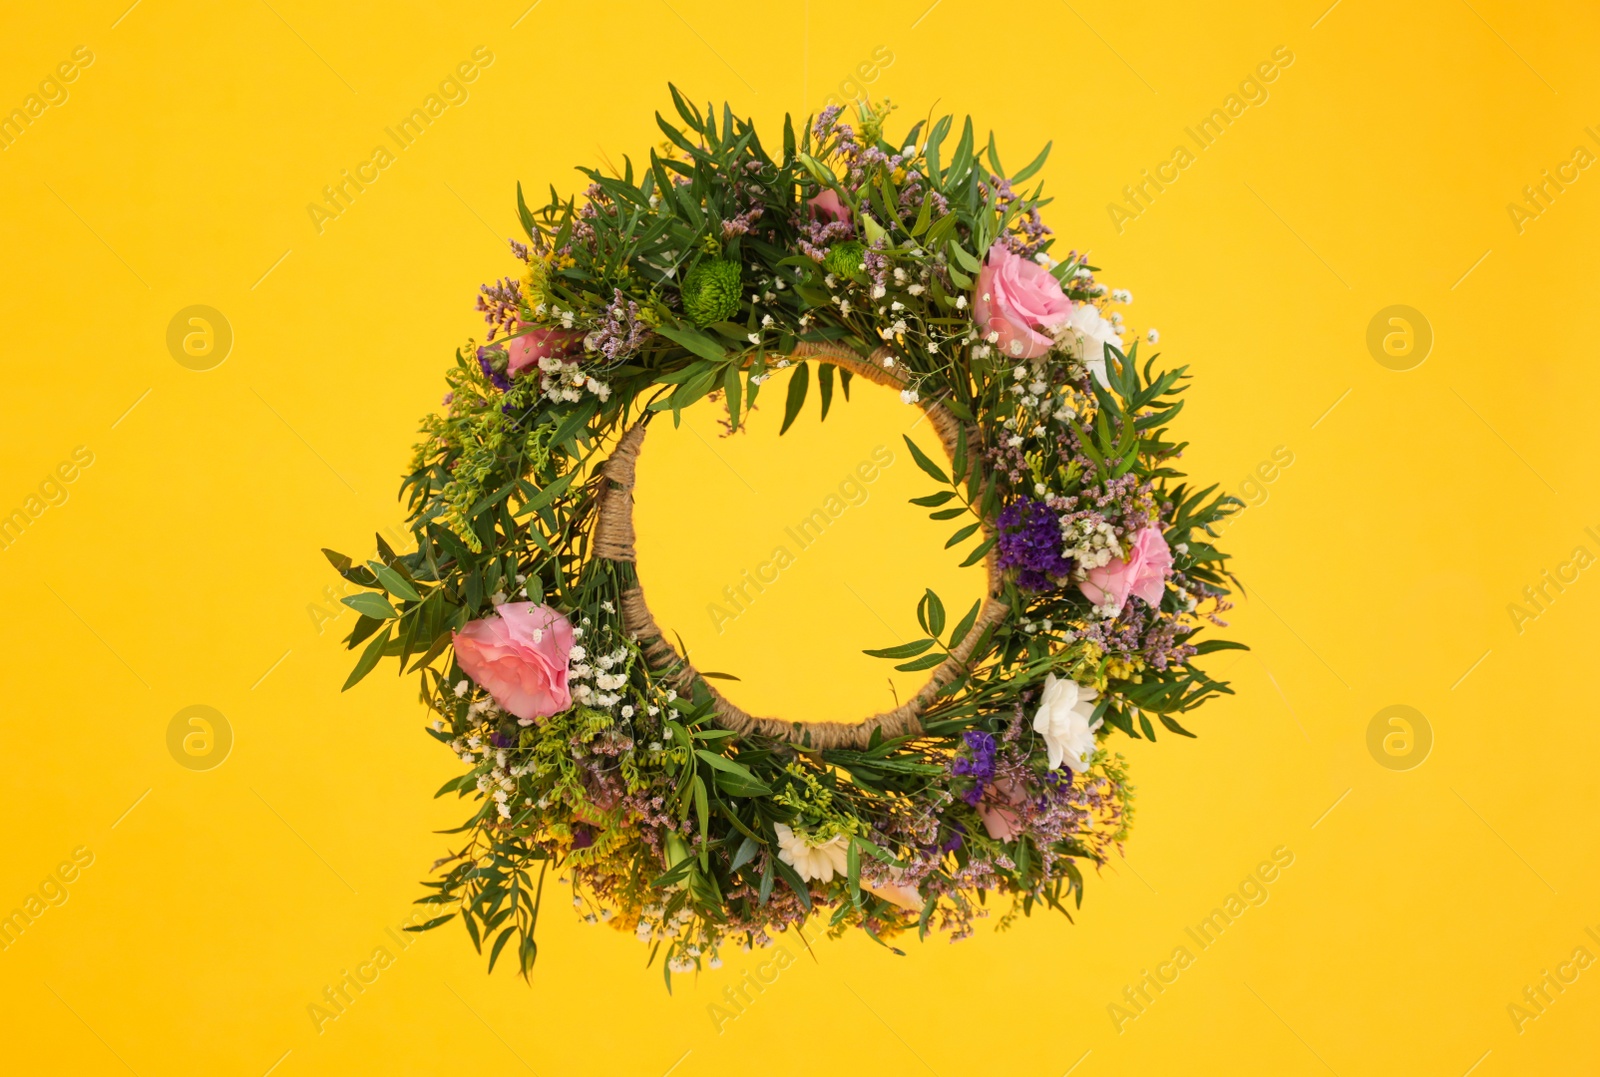 Photo of Wreath made of beautiful flowers hanging on yellow background